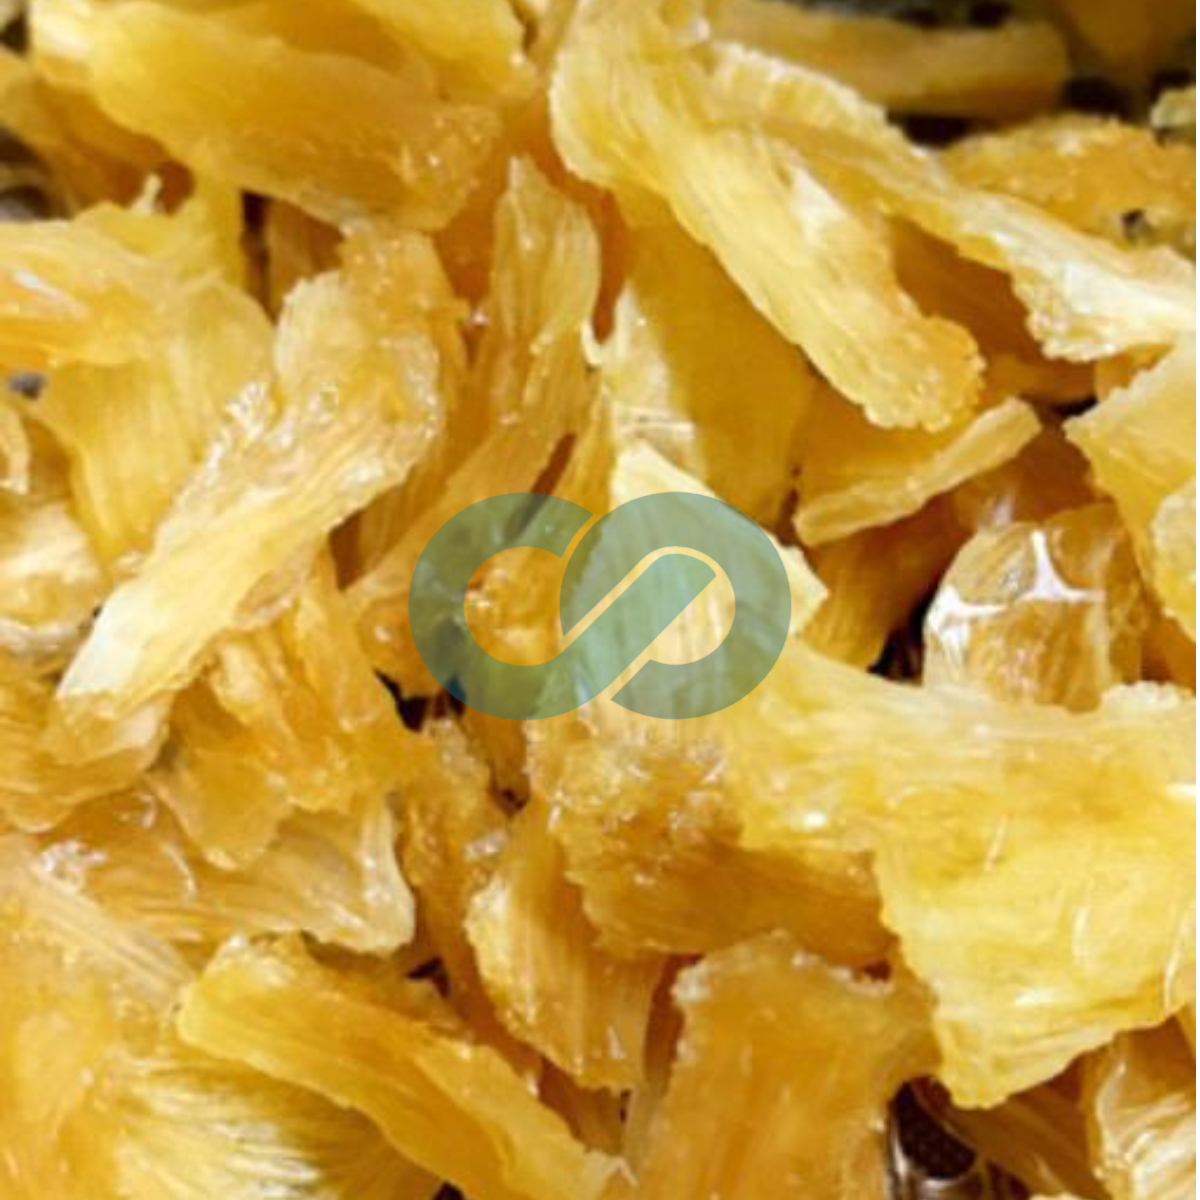 Dried Pineapple!
Origin: Philippines
Grab your high quality Dried fruits here!

visit us costucoast.com
WhatsApp: (+63) 9672260089
Office@costucoast.com

#dryfruits #fruitdried #dryfruitsandnuts #dryfruit #dryfruitbox #dryfruitpacking #foodie #foodlove #foodlovers